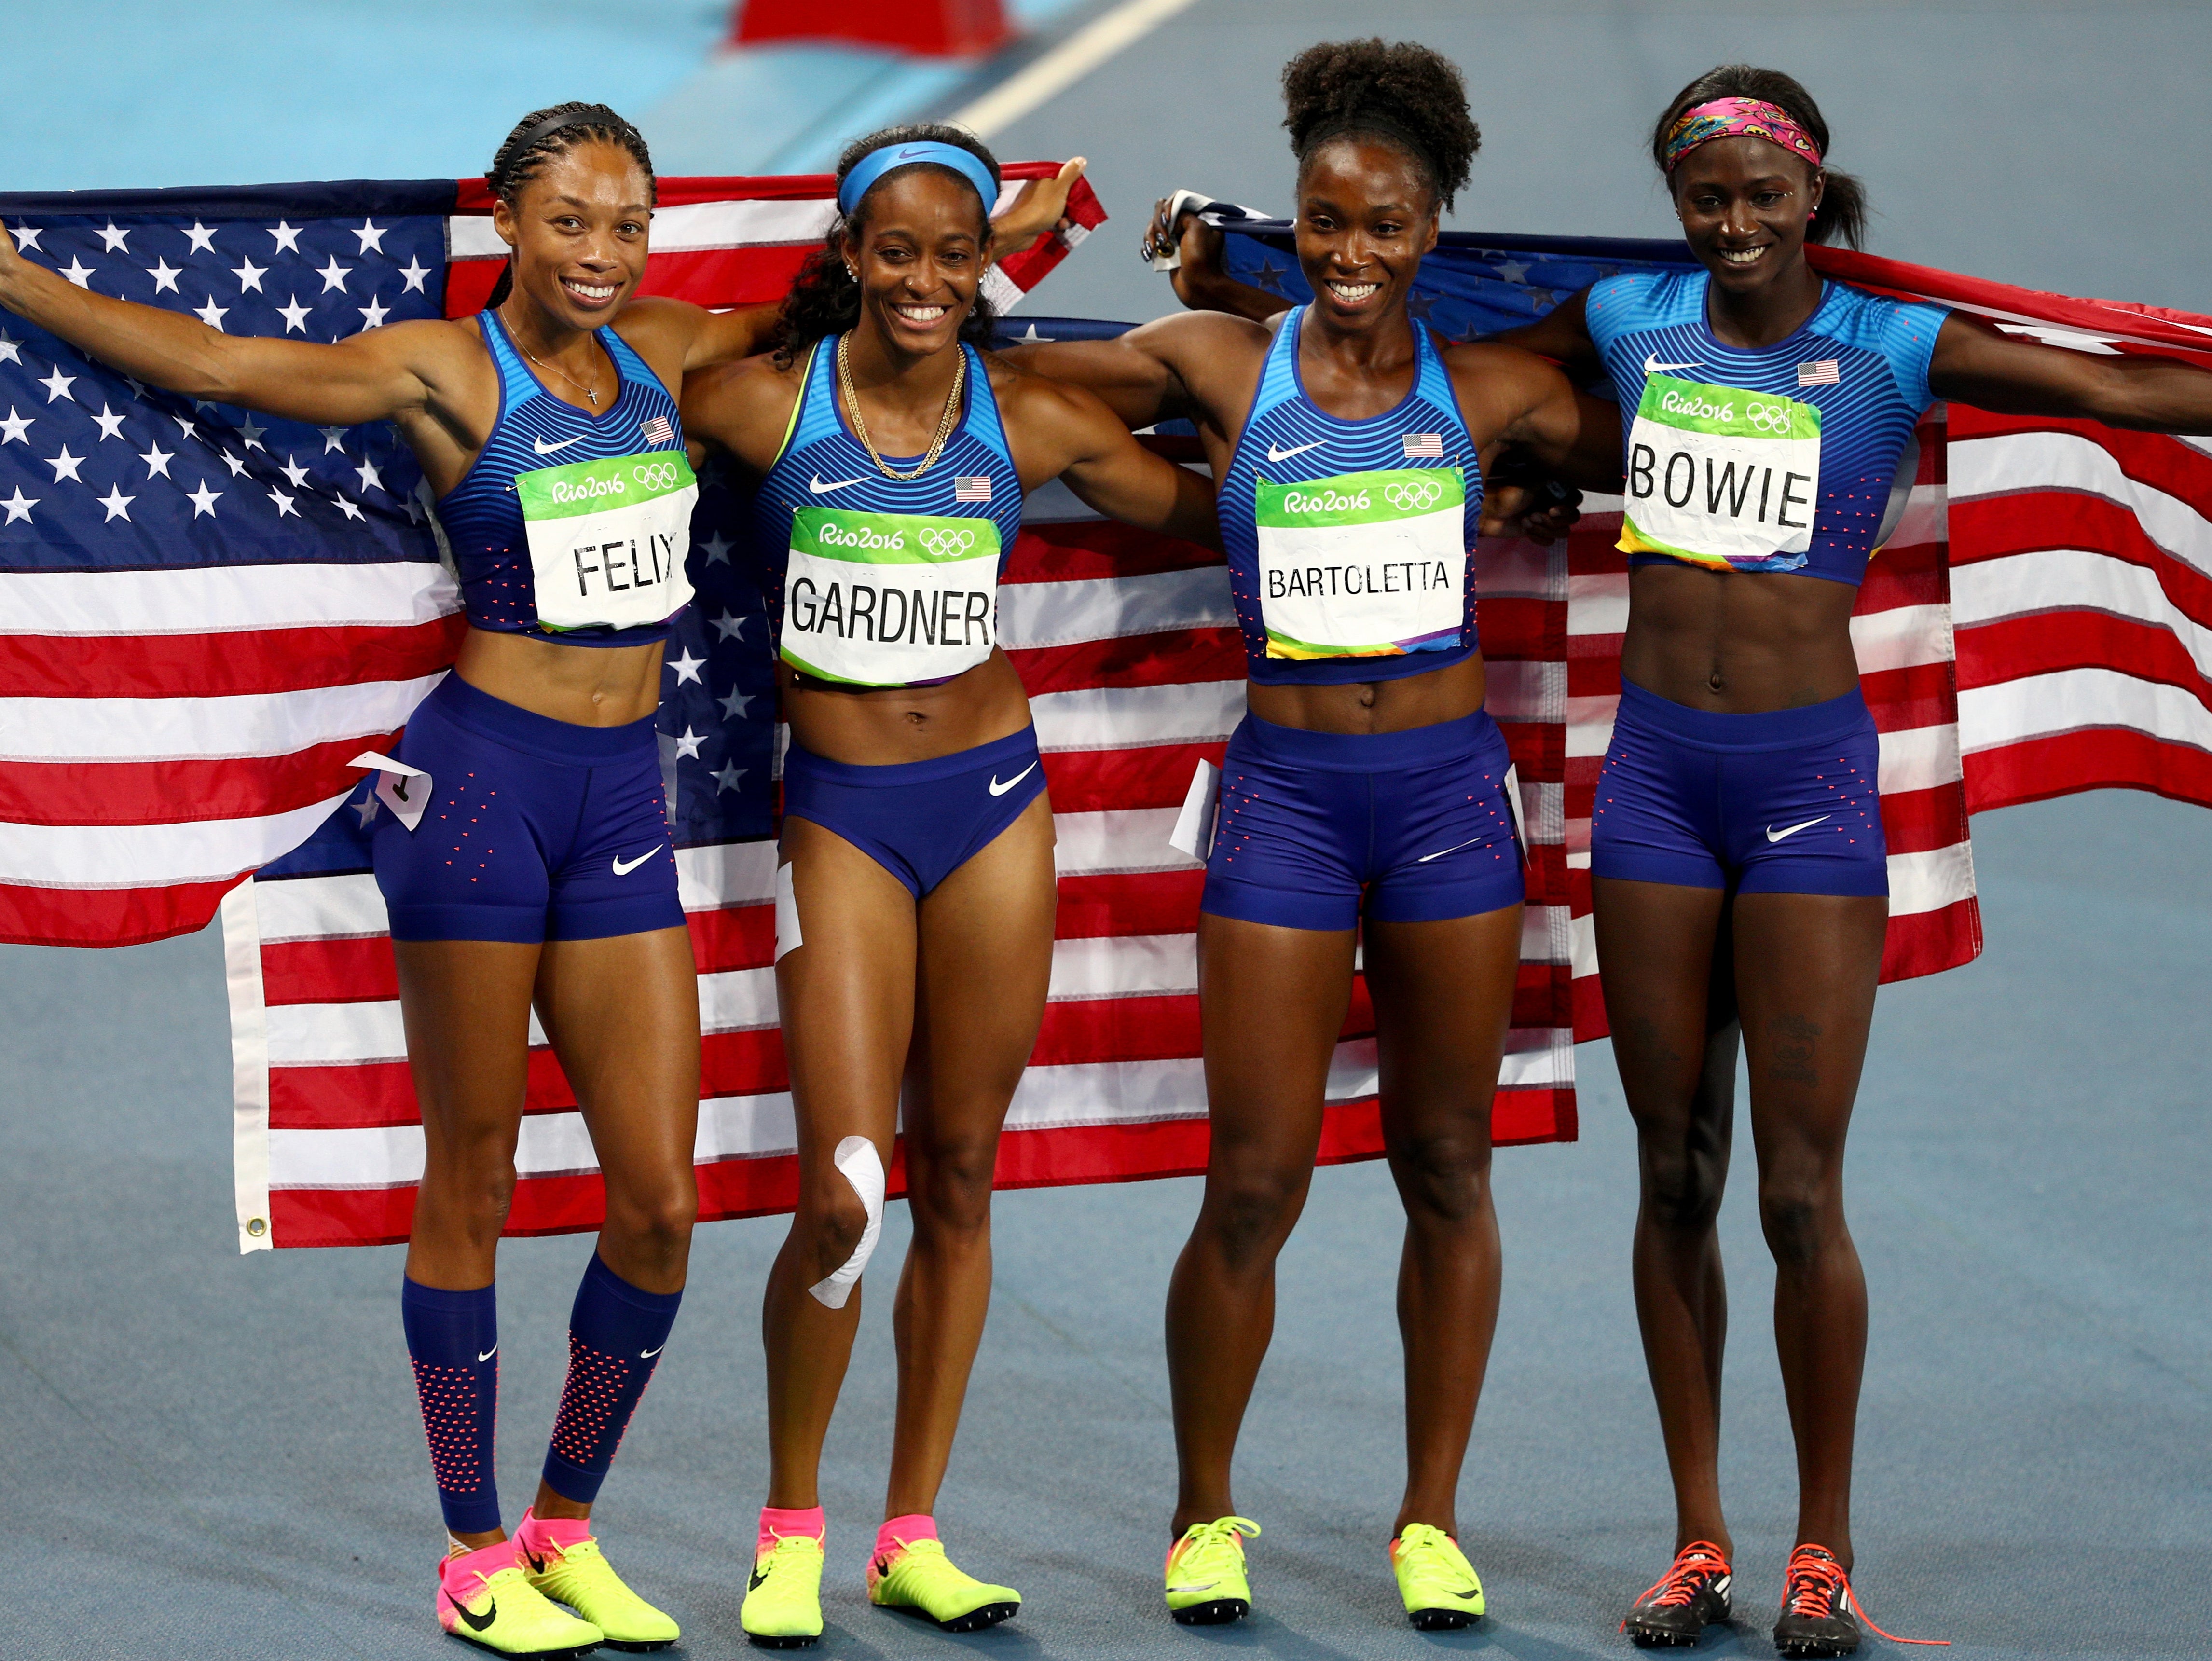 Tori Bowie was part of the victorious US 4x100m relay quartet at the Rio 2016 Olympics